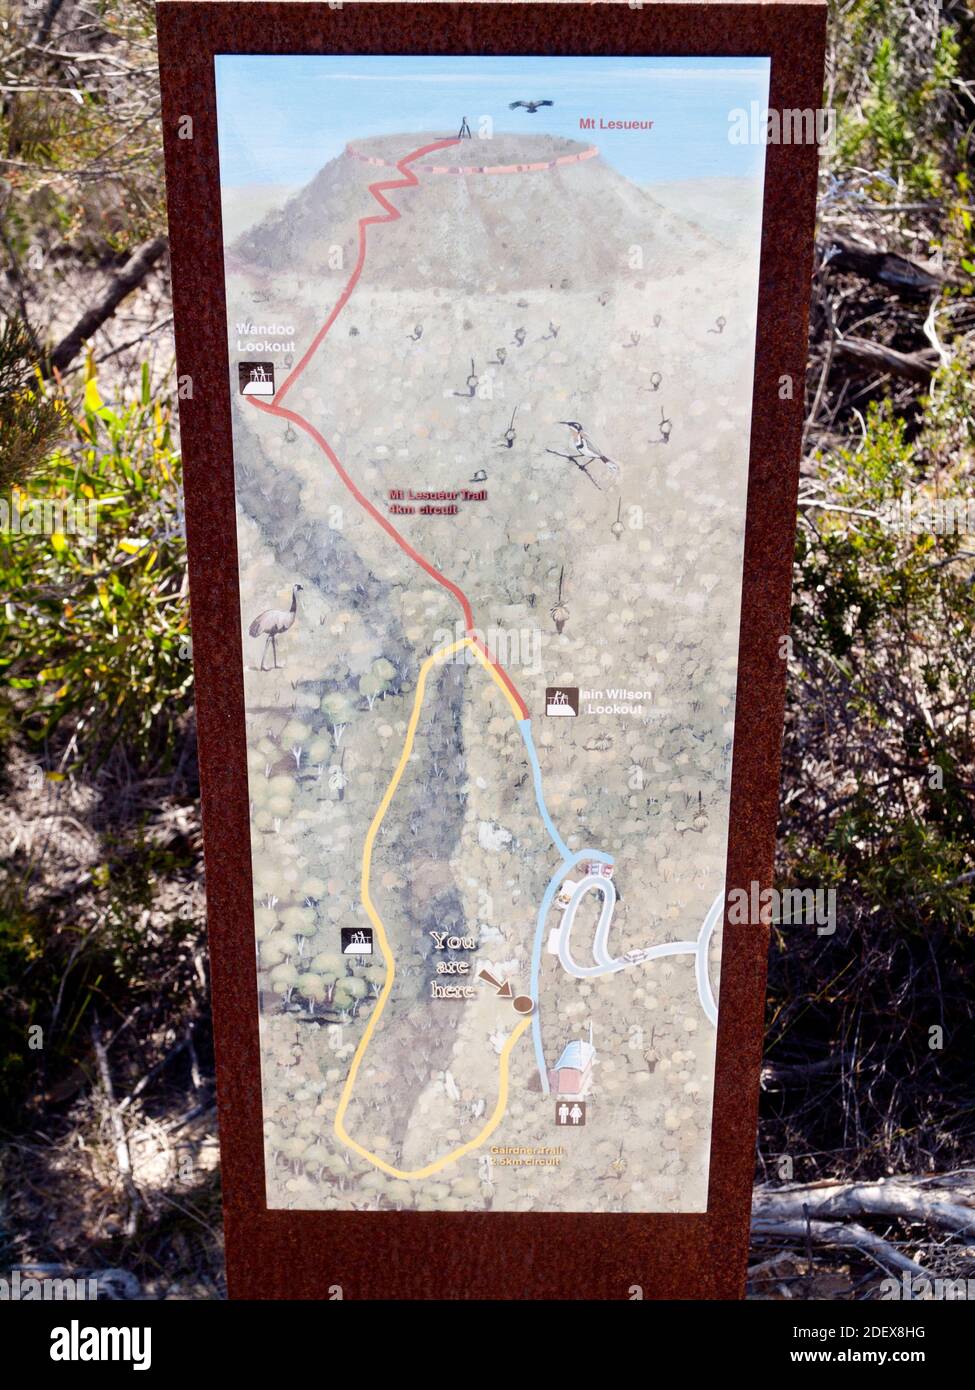 Map of the summit walking trail up Mt Lesueur (313m), highpoint of Lesueur National Park, a biodiversity hotspot on the Turquoise Coast. Stock Photo